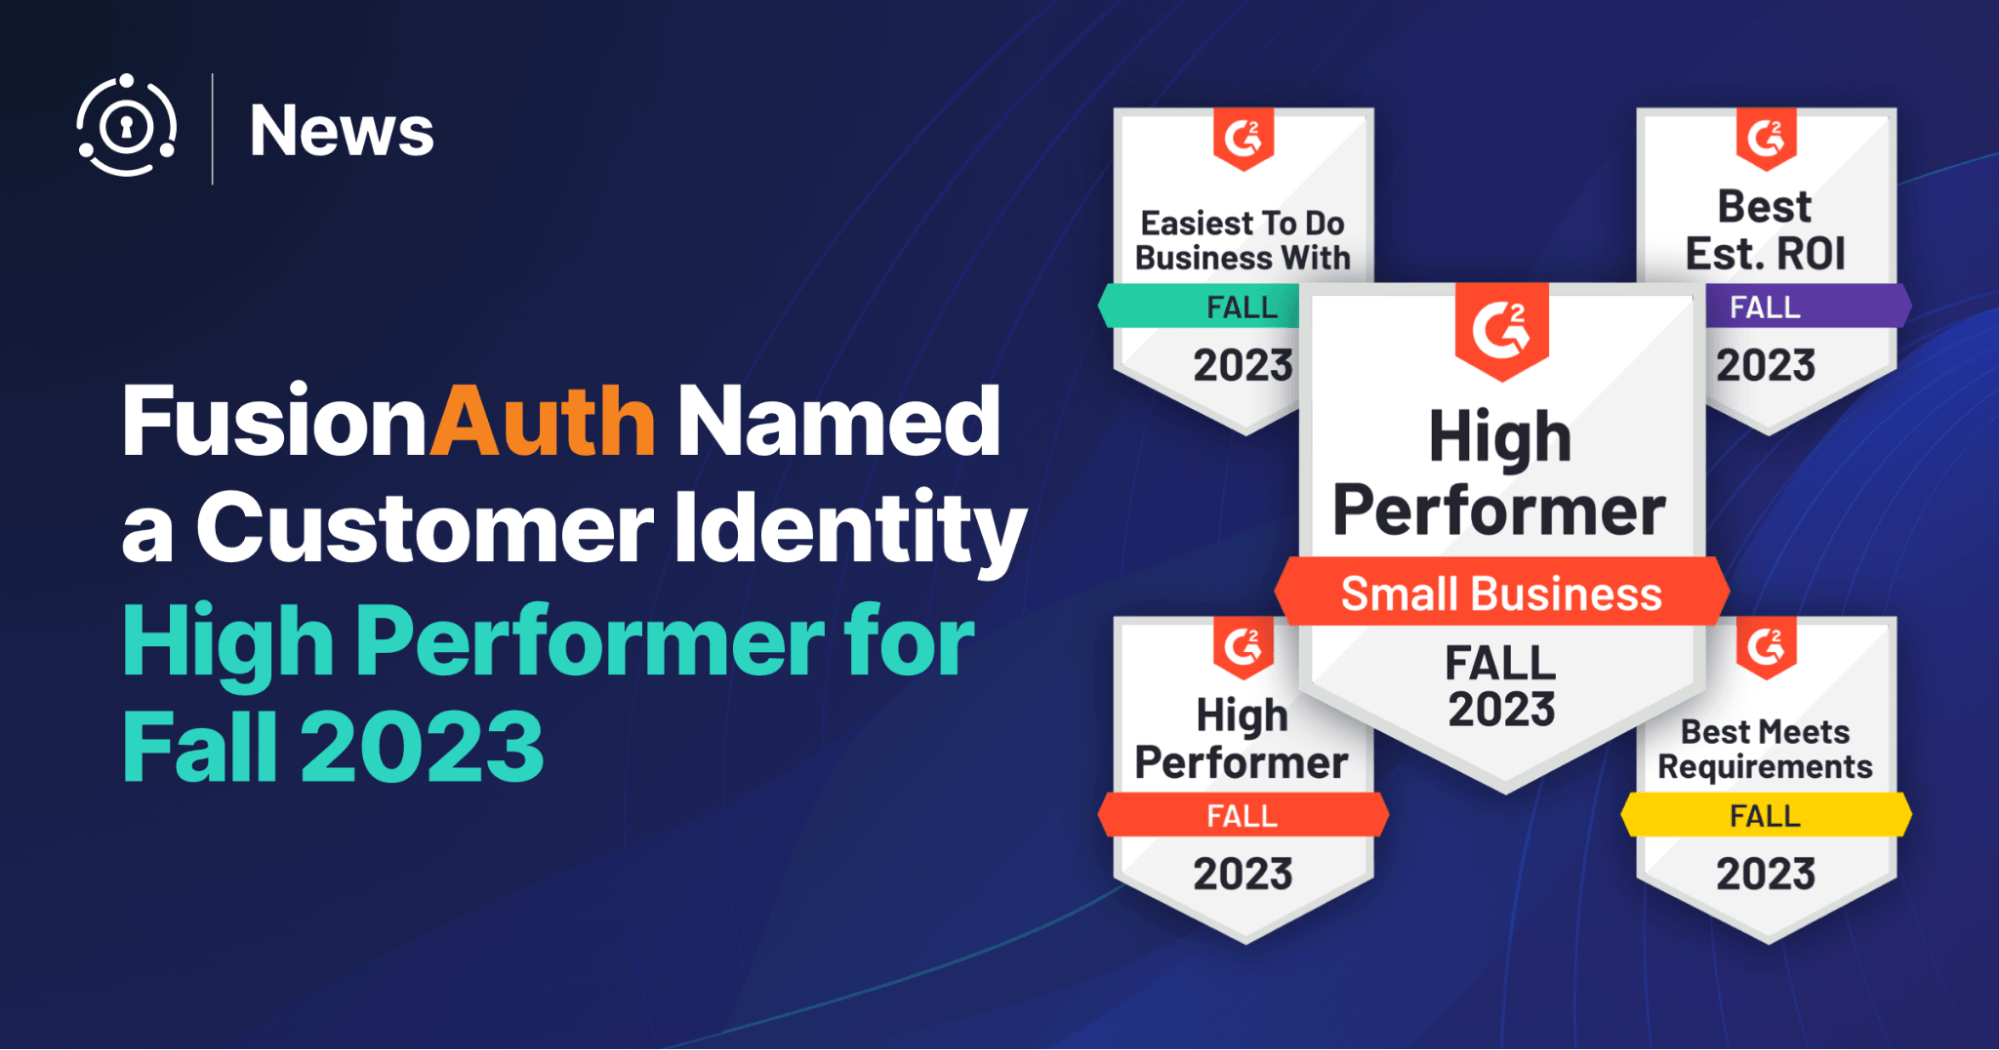 FusionAuth Named a Customer Identity High Performer for Fall 2023